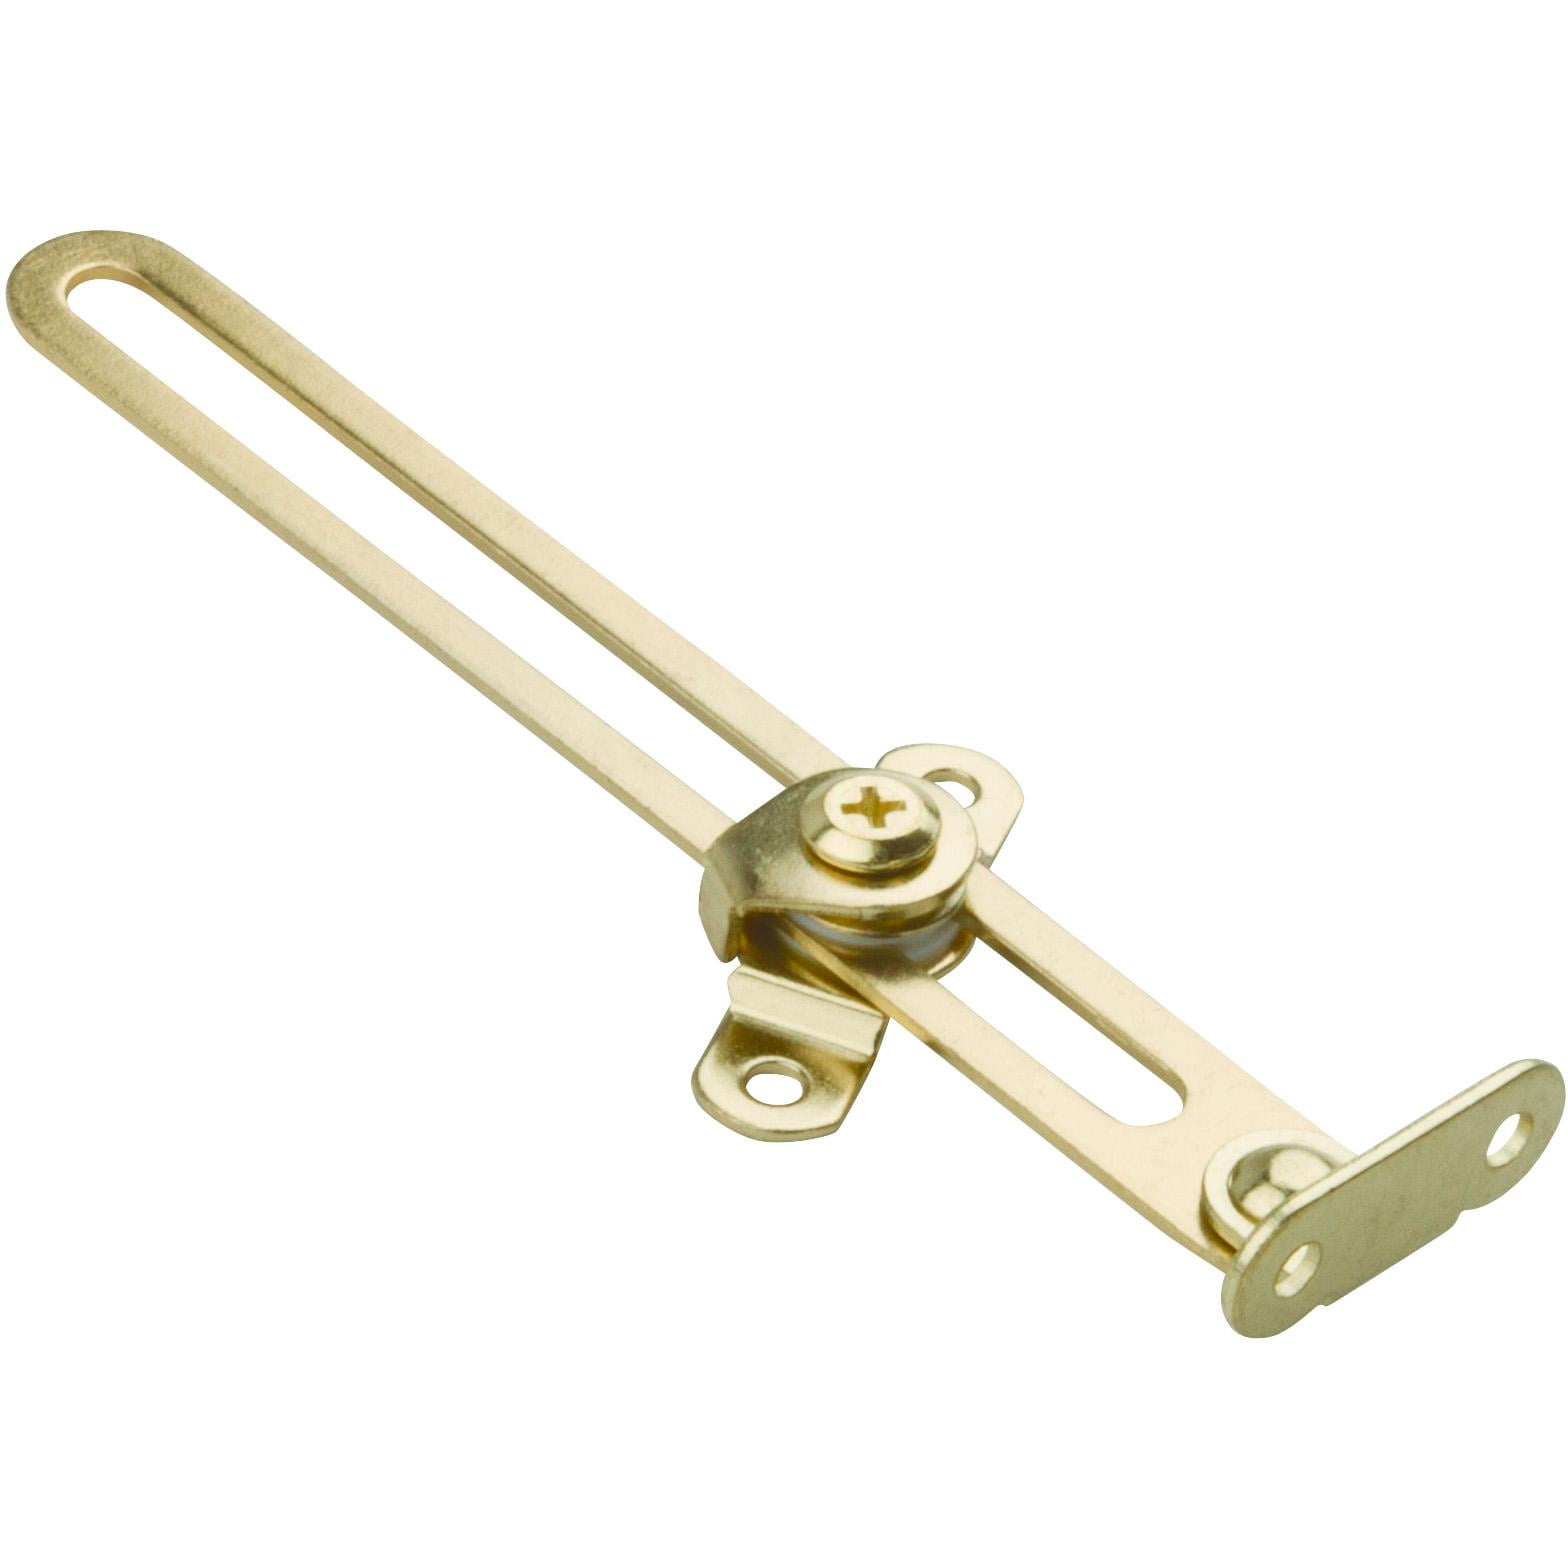 0.65 X 5.75 In. Friction Lid Support - Polished Brass